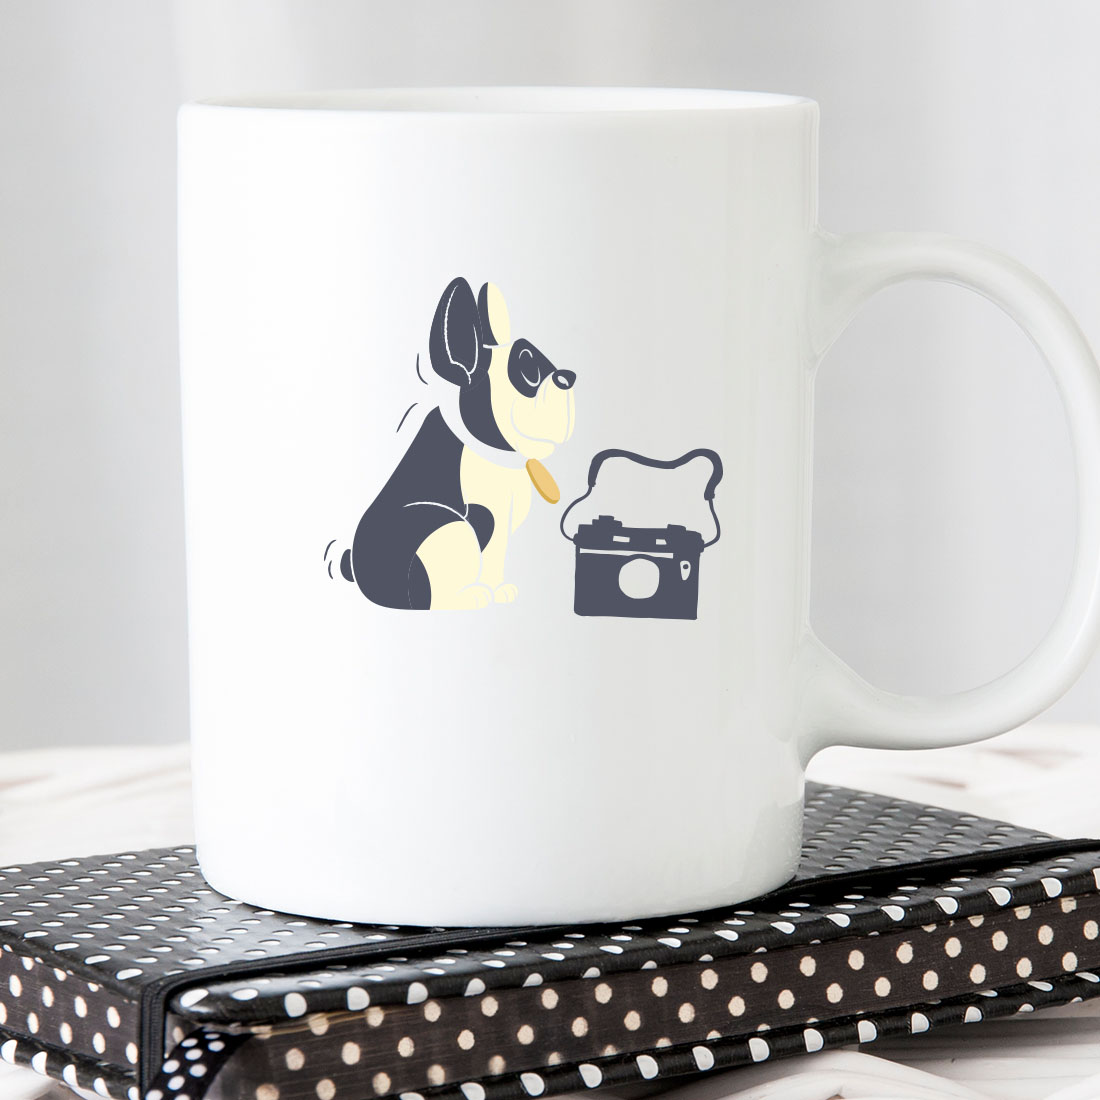 White coffee mug with a black and white dog on it.